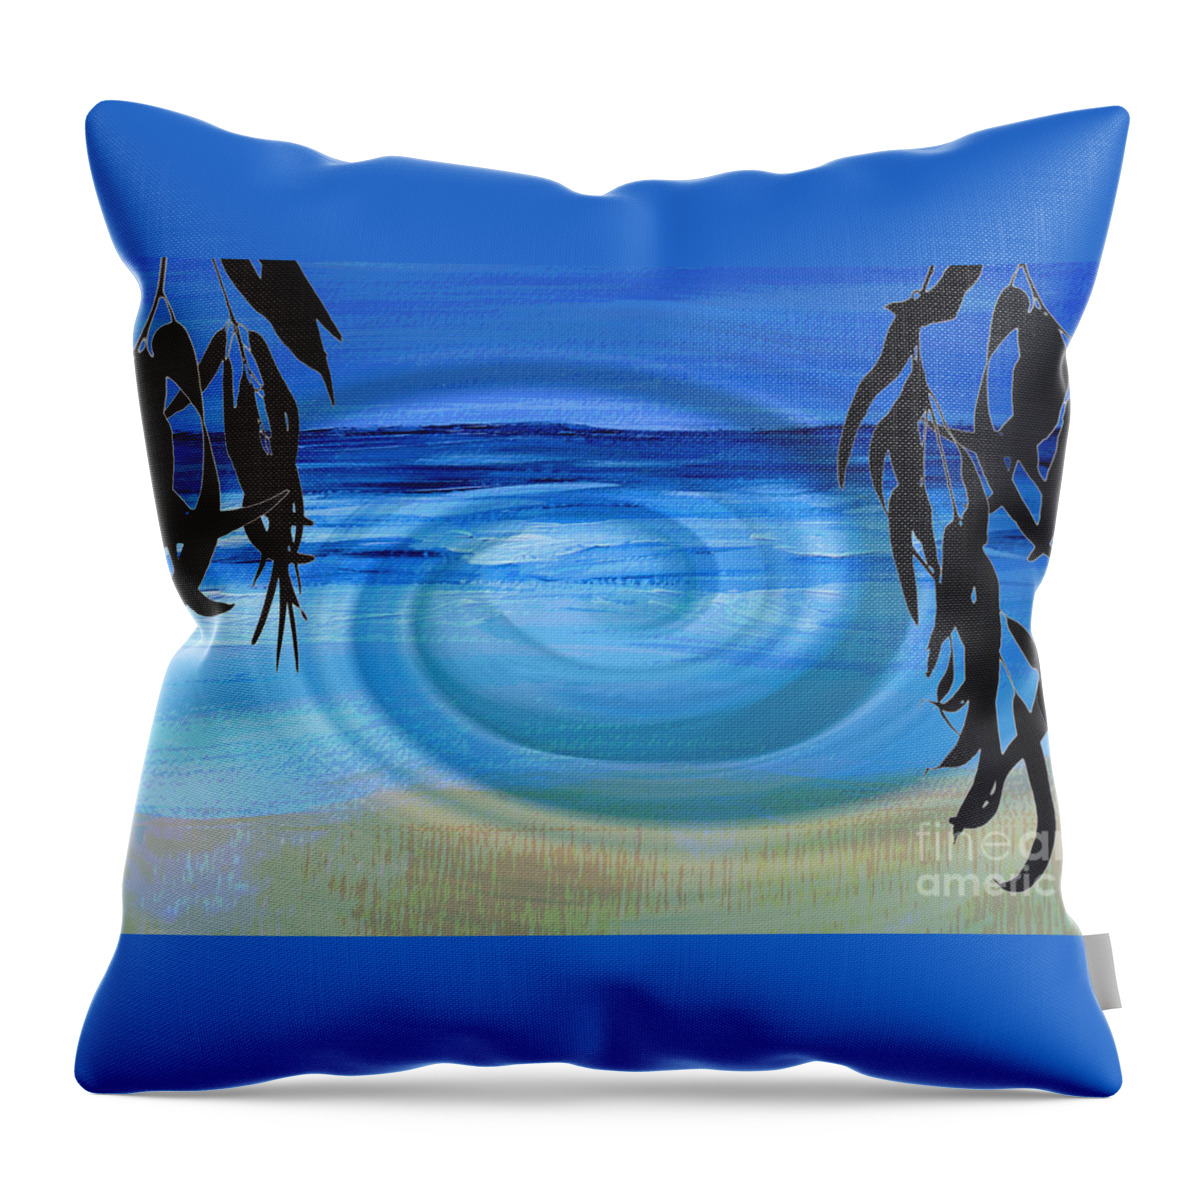 Water Throw Pillow featuring the digital art Eucalyptus Ocean View by Shelley Myers